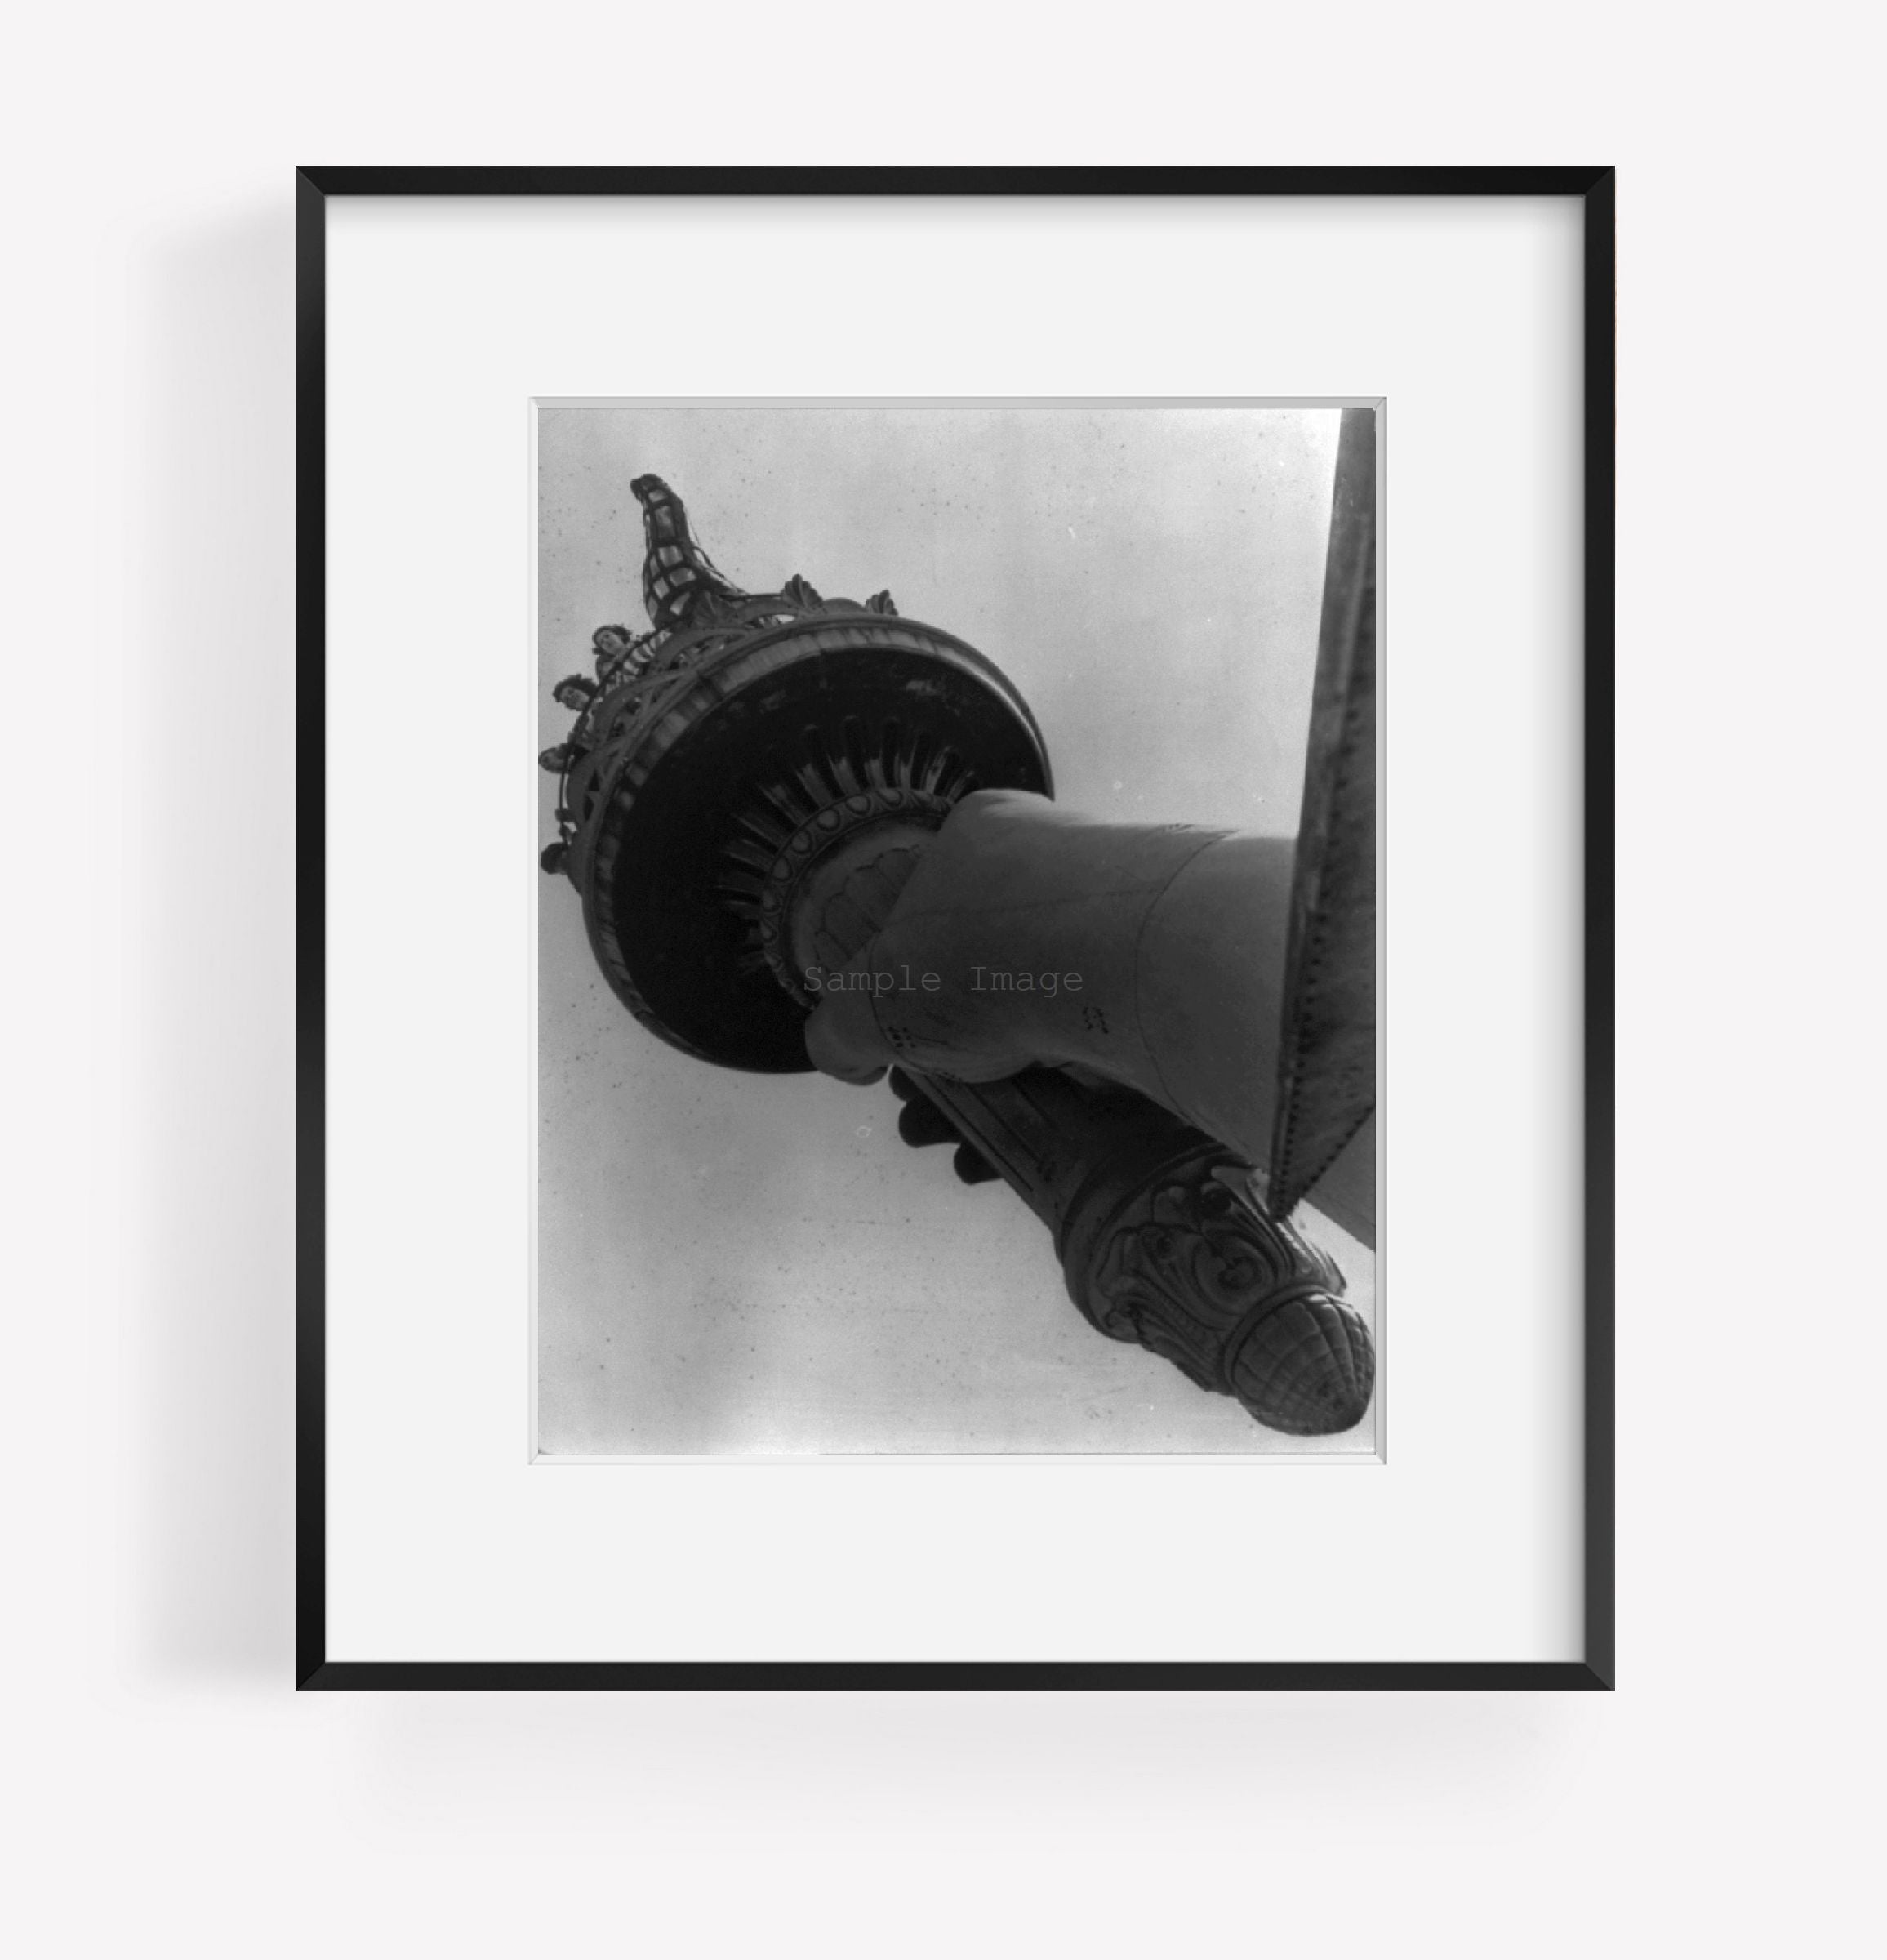 1944? photograph of The Statue of Liberty: Hand and torch of the statue